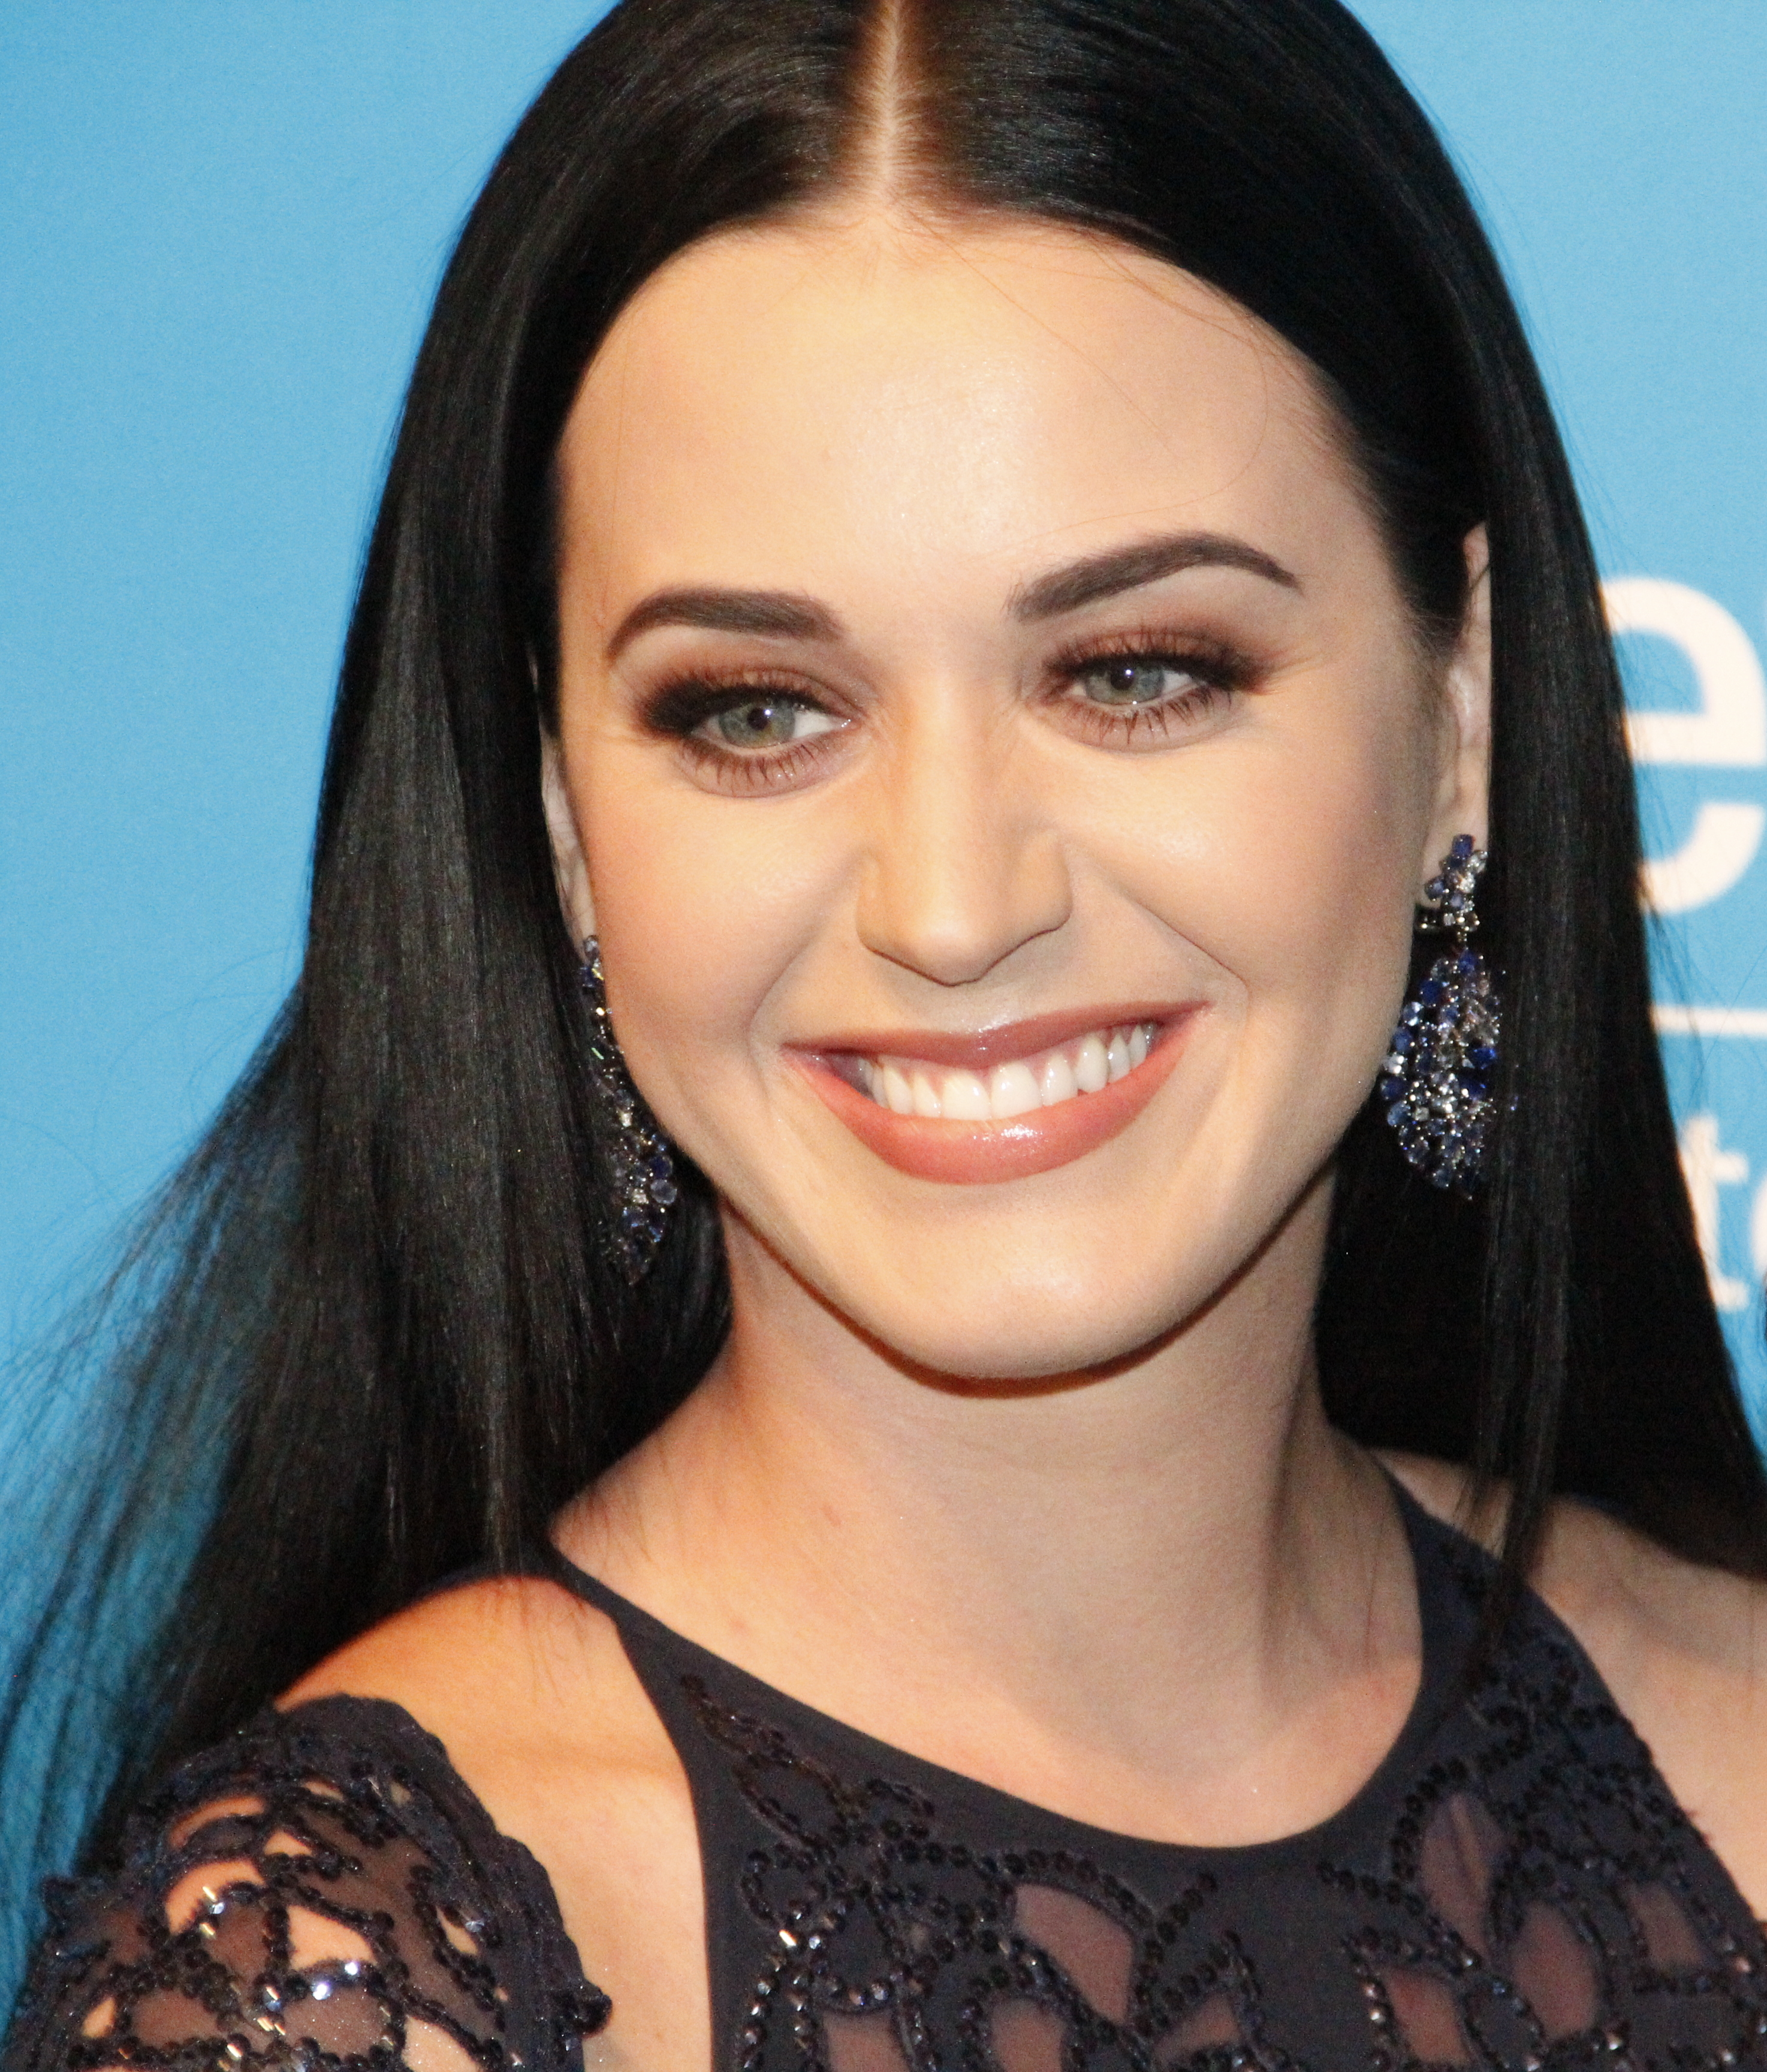 Katy Perry laughing